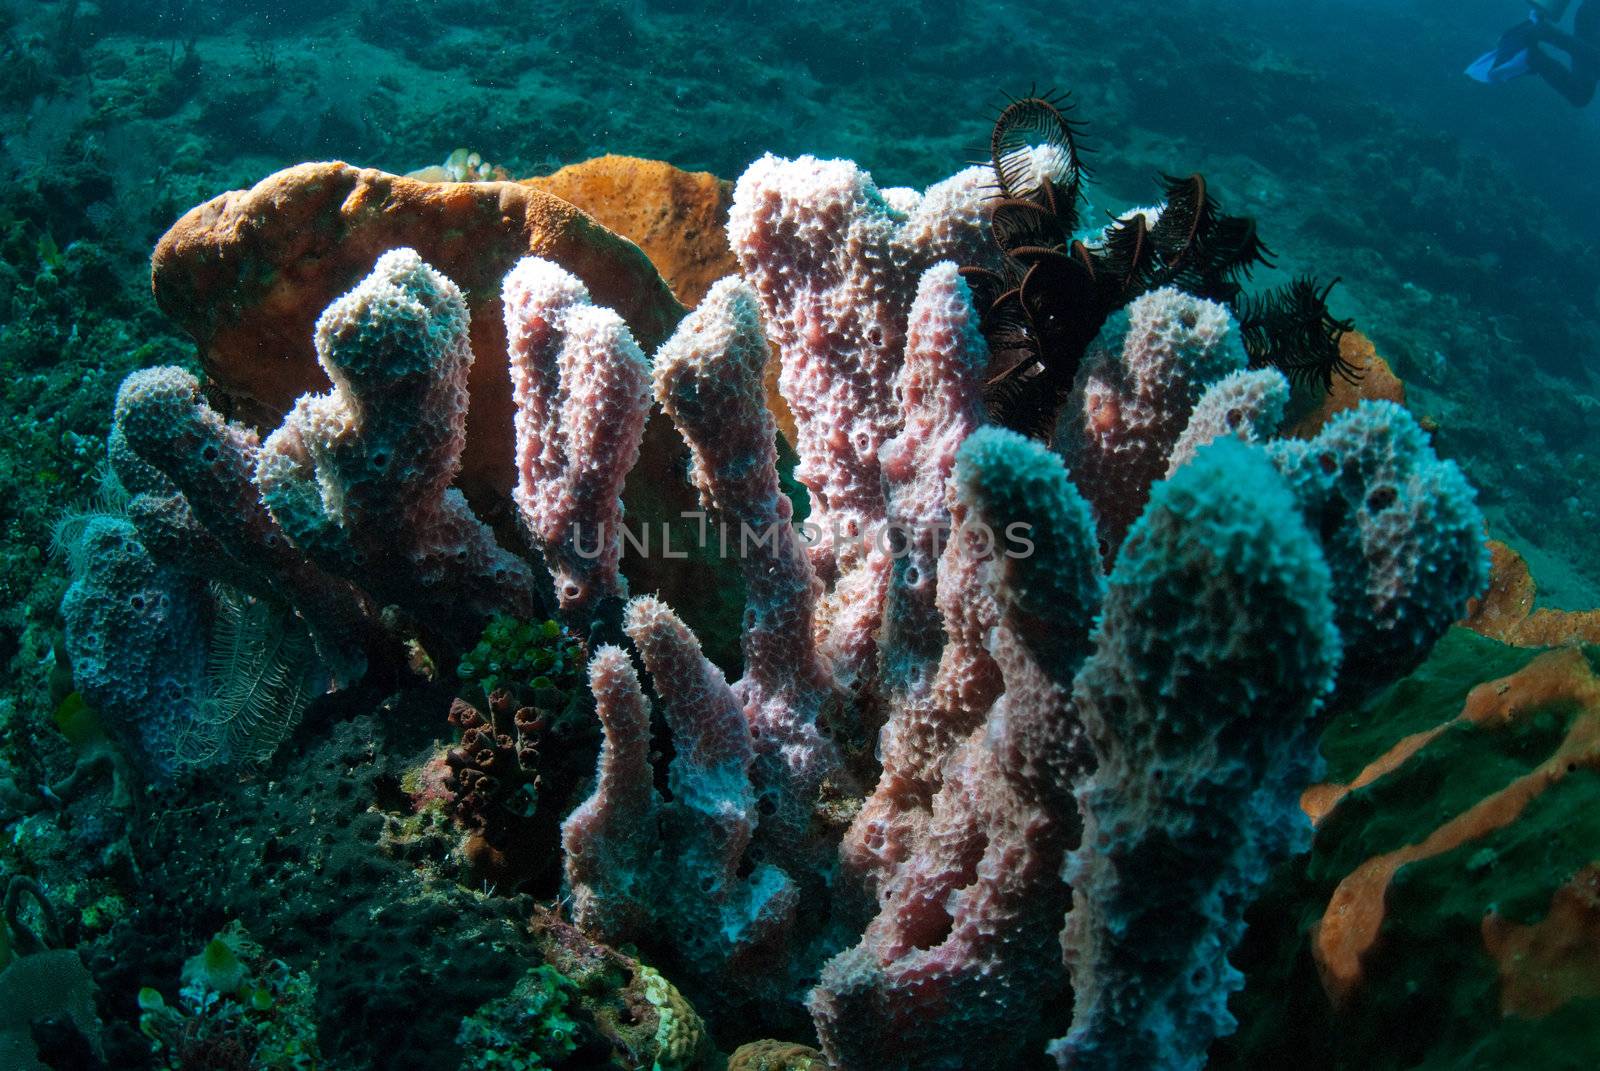 Underwater coral, fish, and plants in Bali by edan